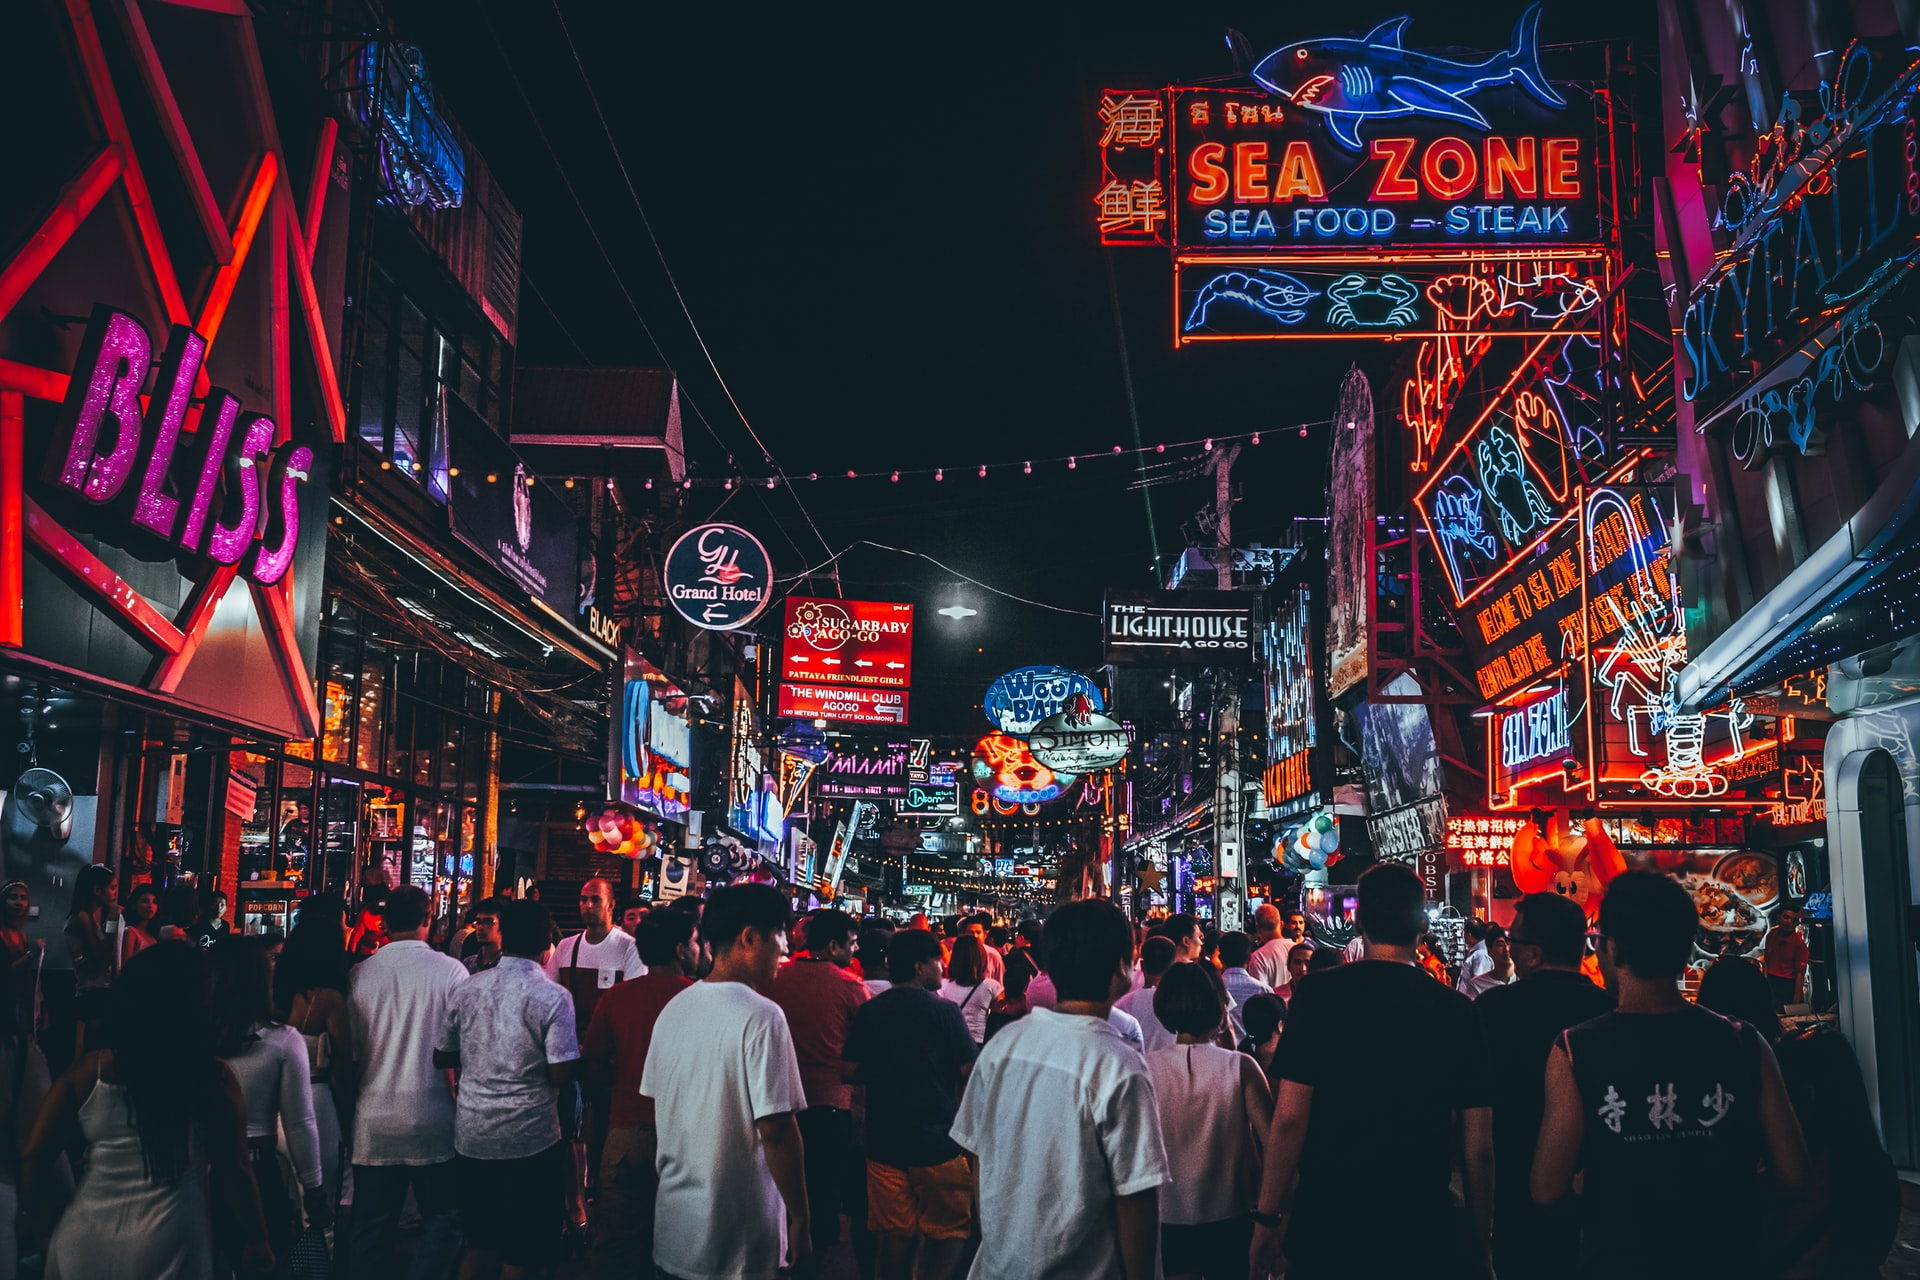 Thai authorities organize "cryptocurrency tourism" for economic recovery